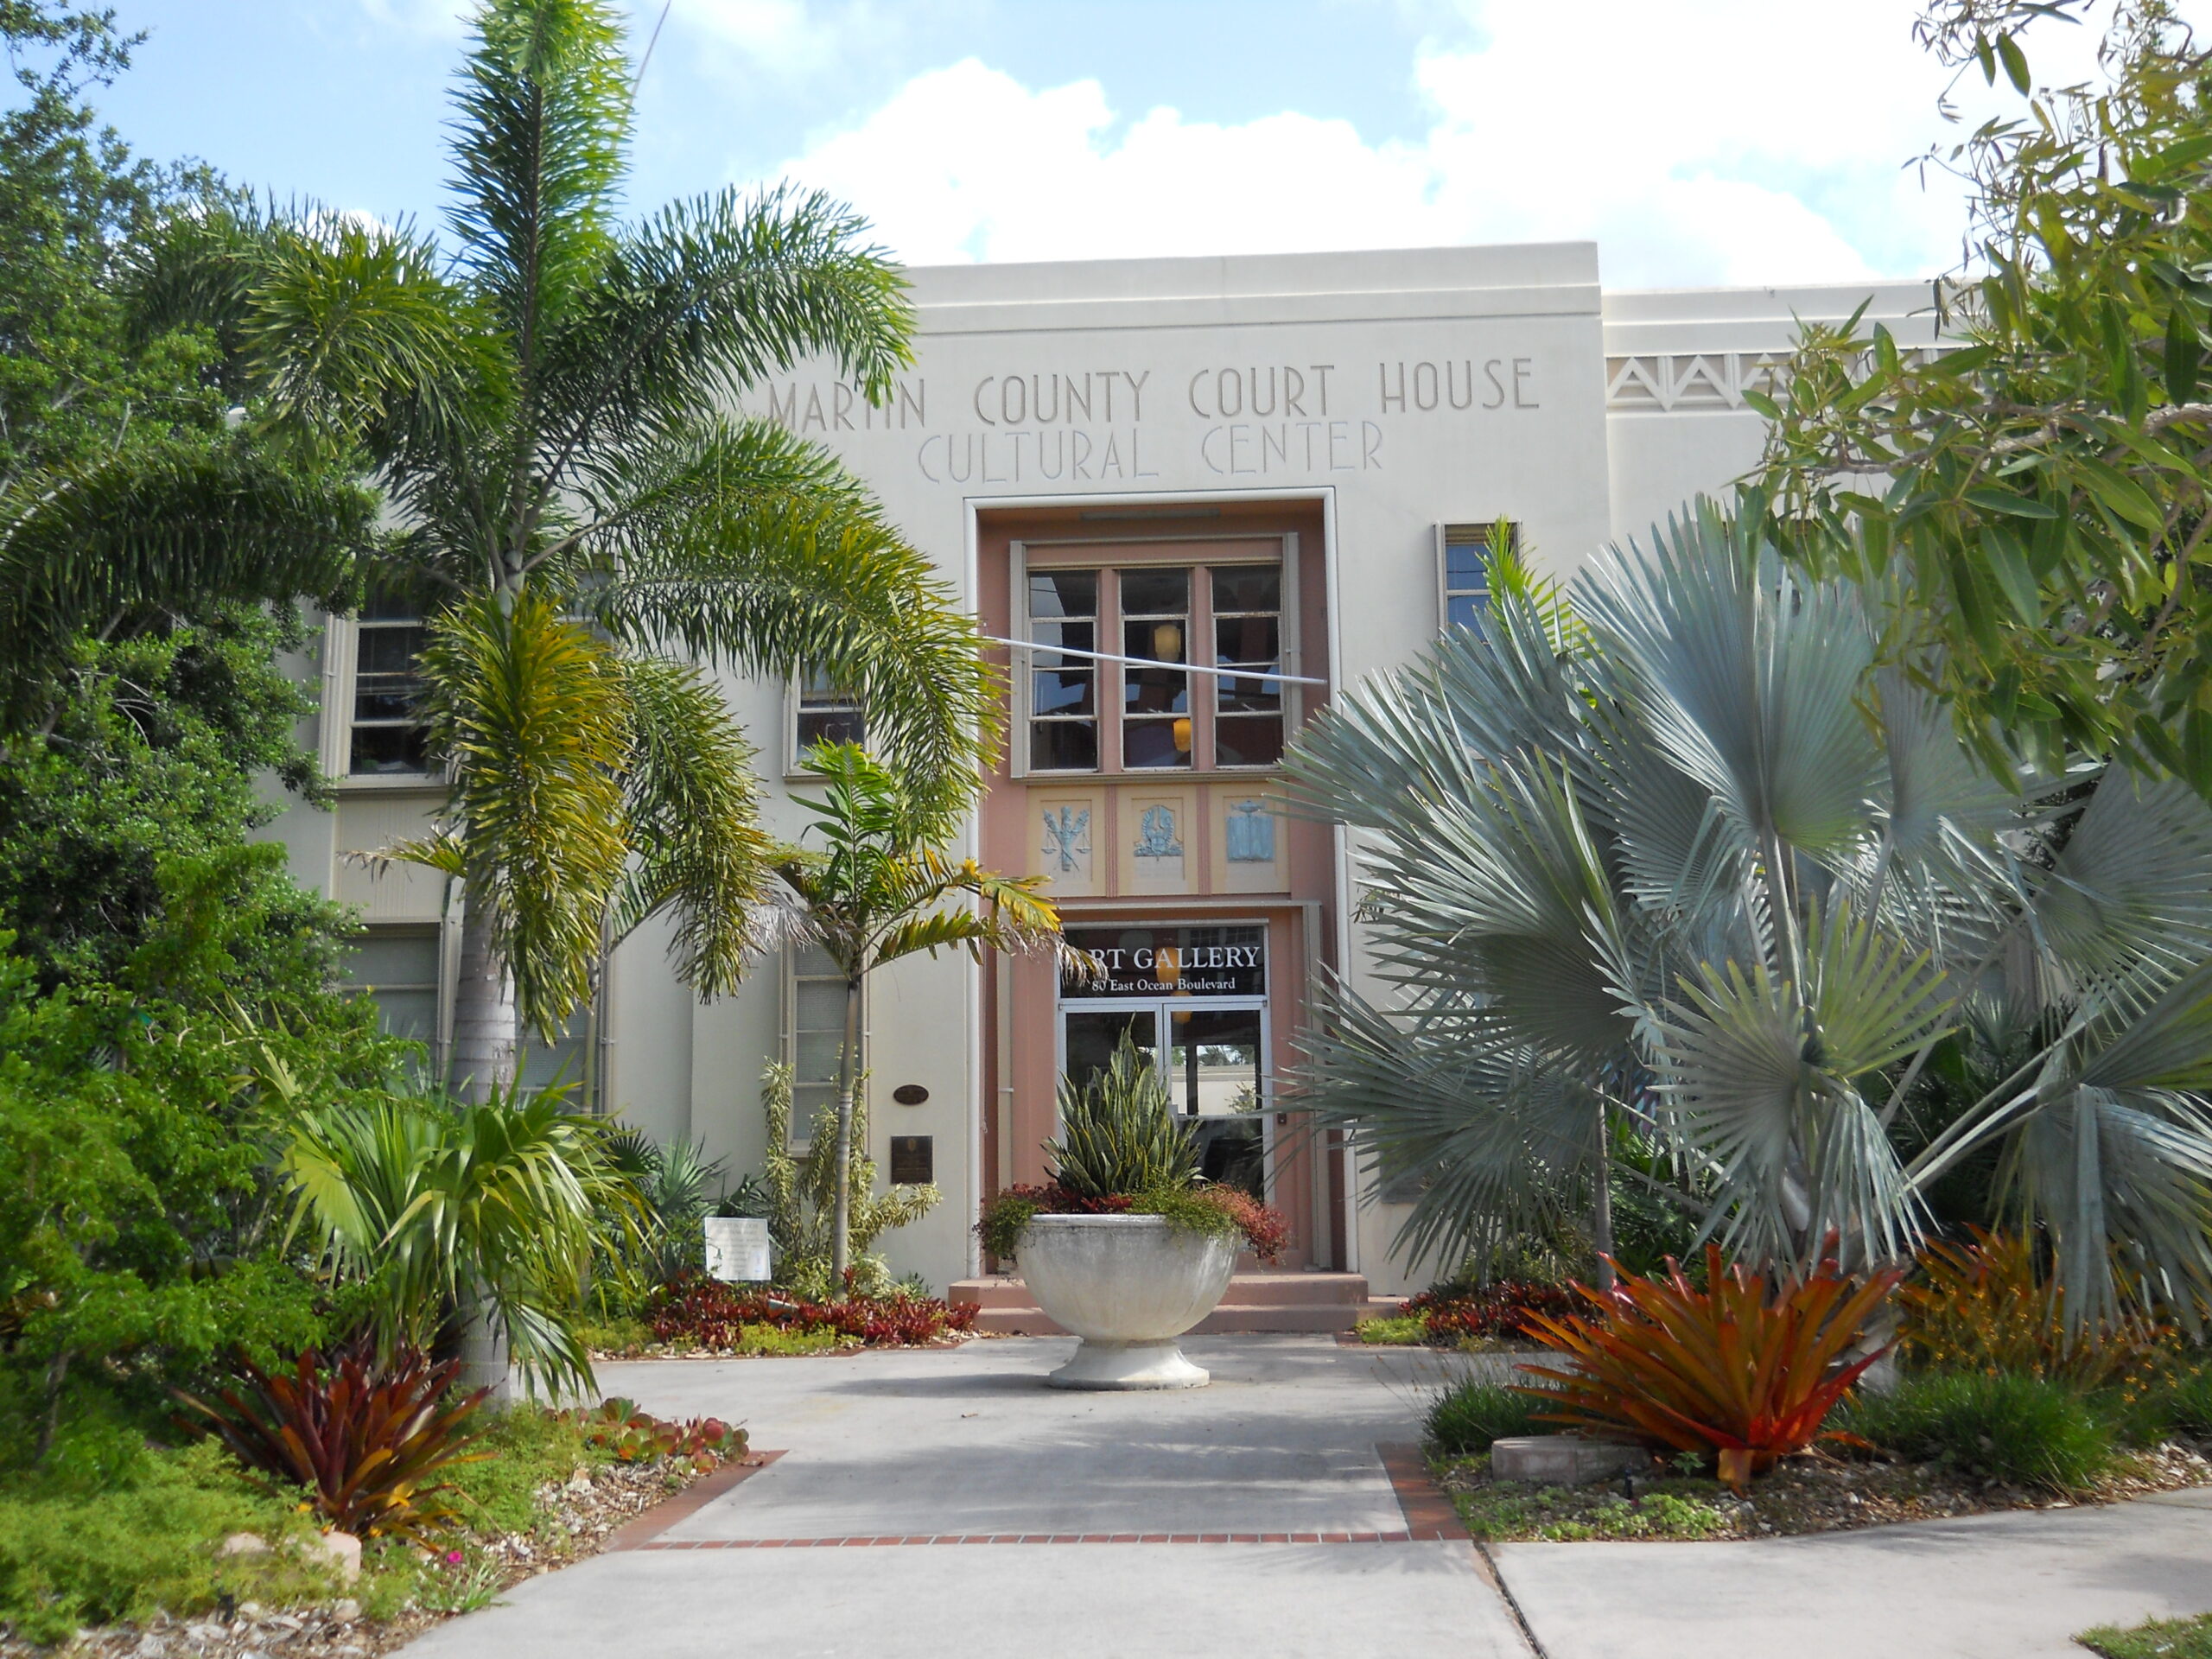 The 1937 Martin County Court House